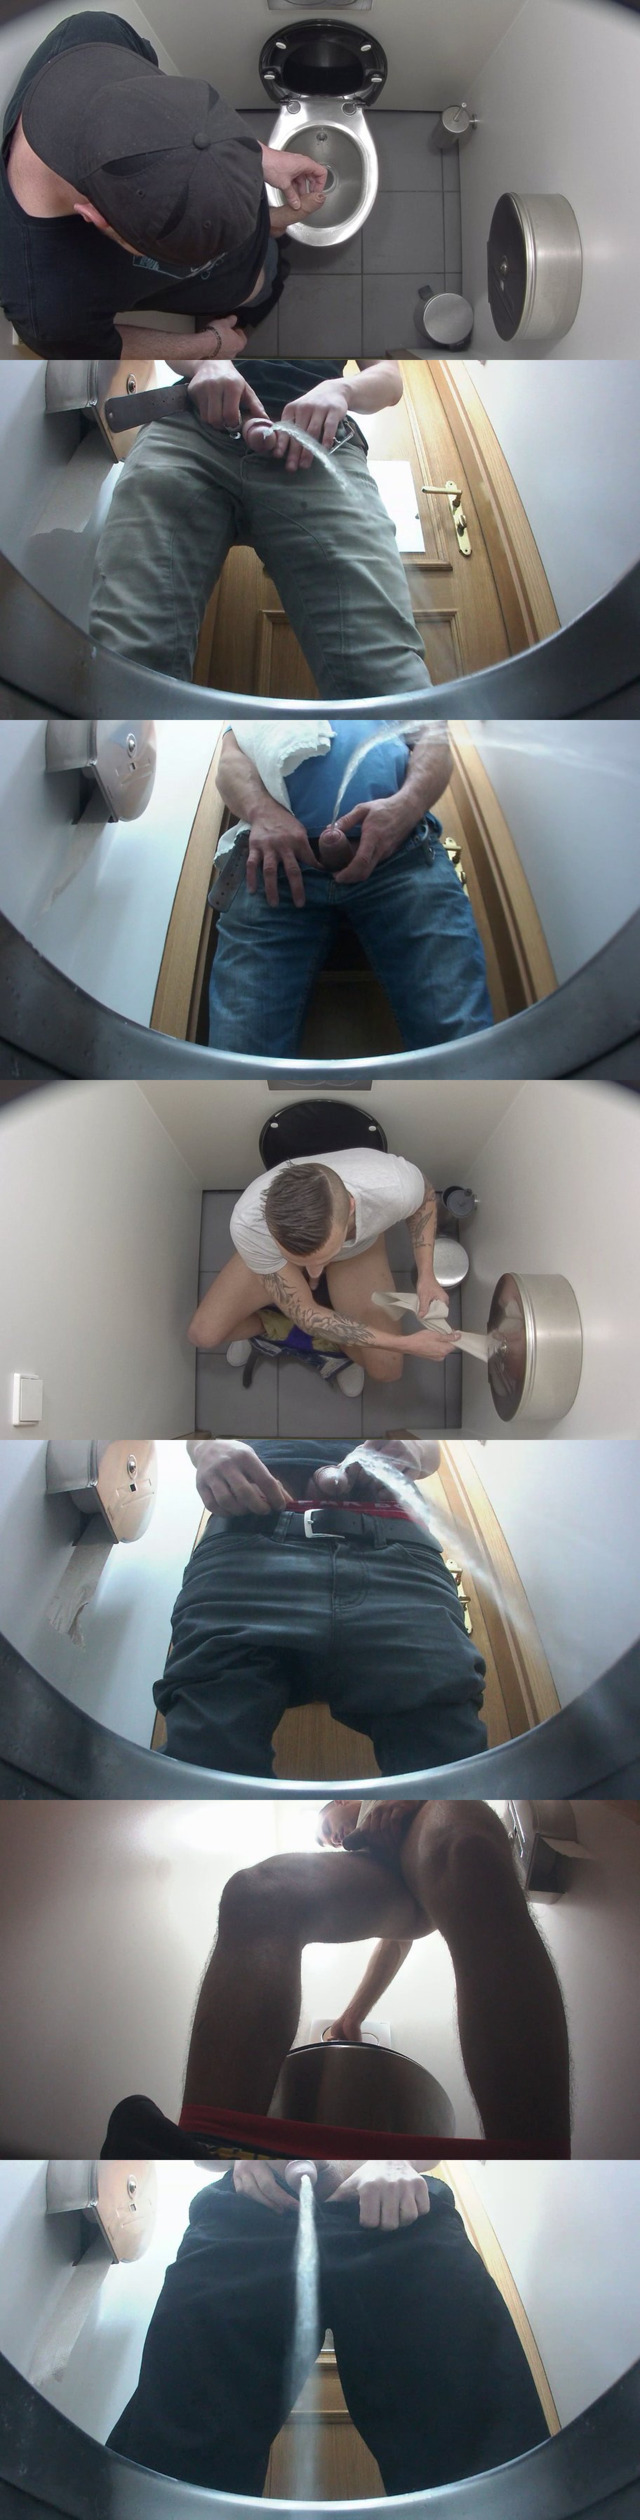 Spying on guys in the toilet with 3 hidden cameras